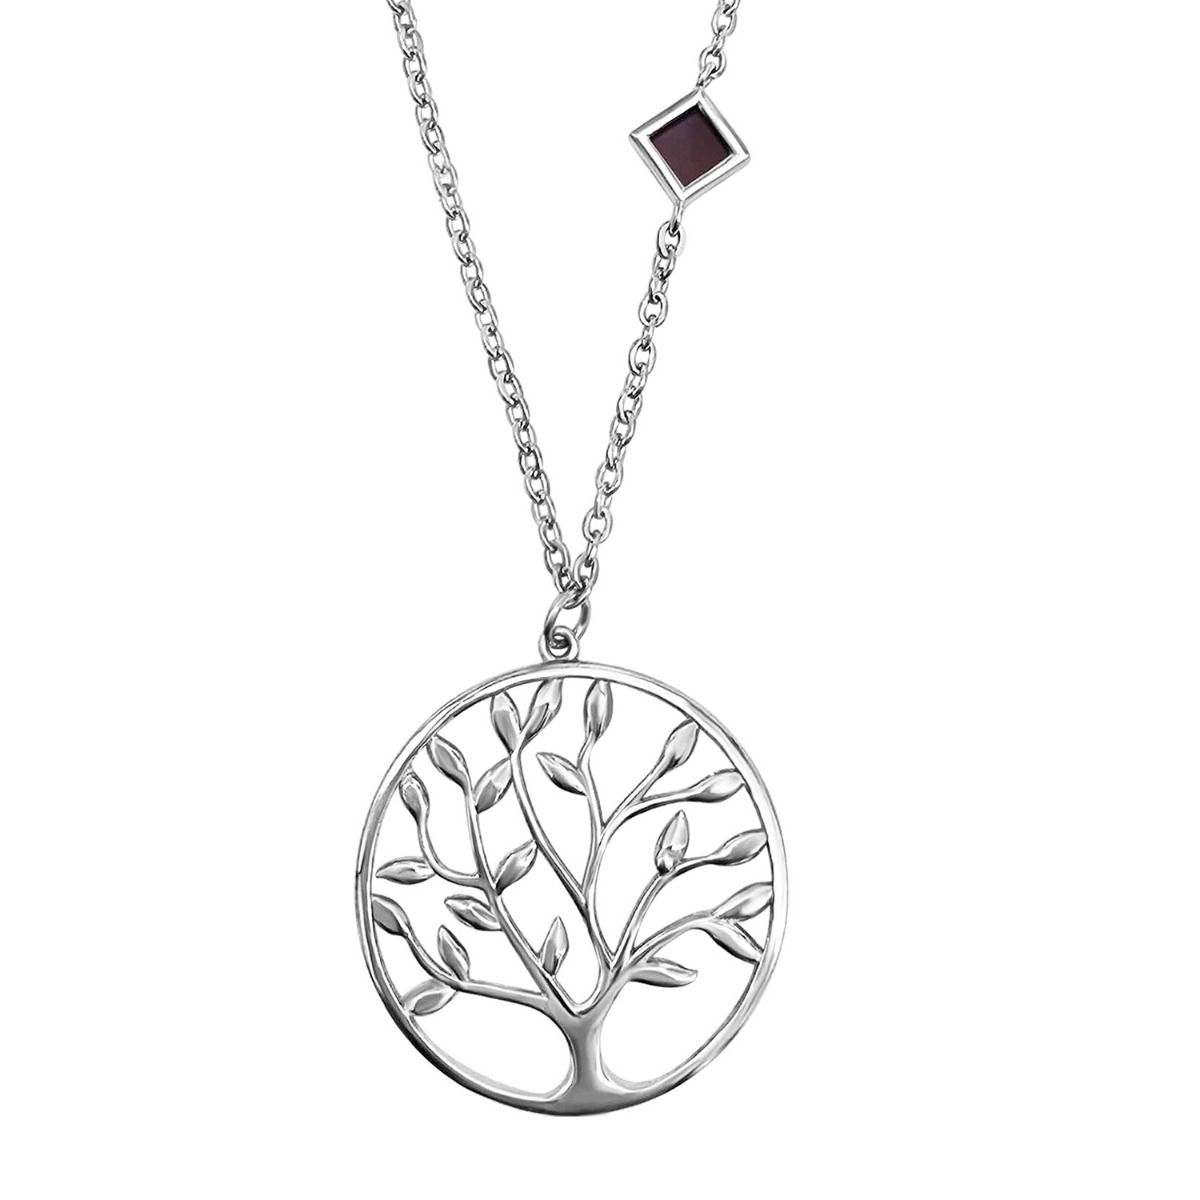 Nano Tree of Life Necklace with Bible Microchip - Silver or Gold-Plated - 1